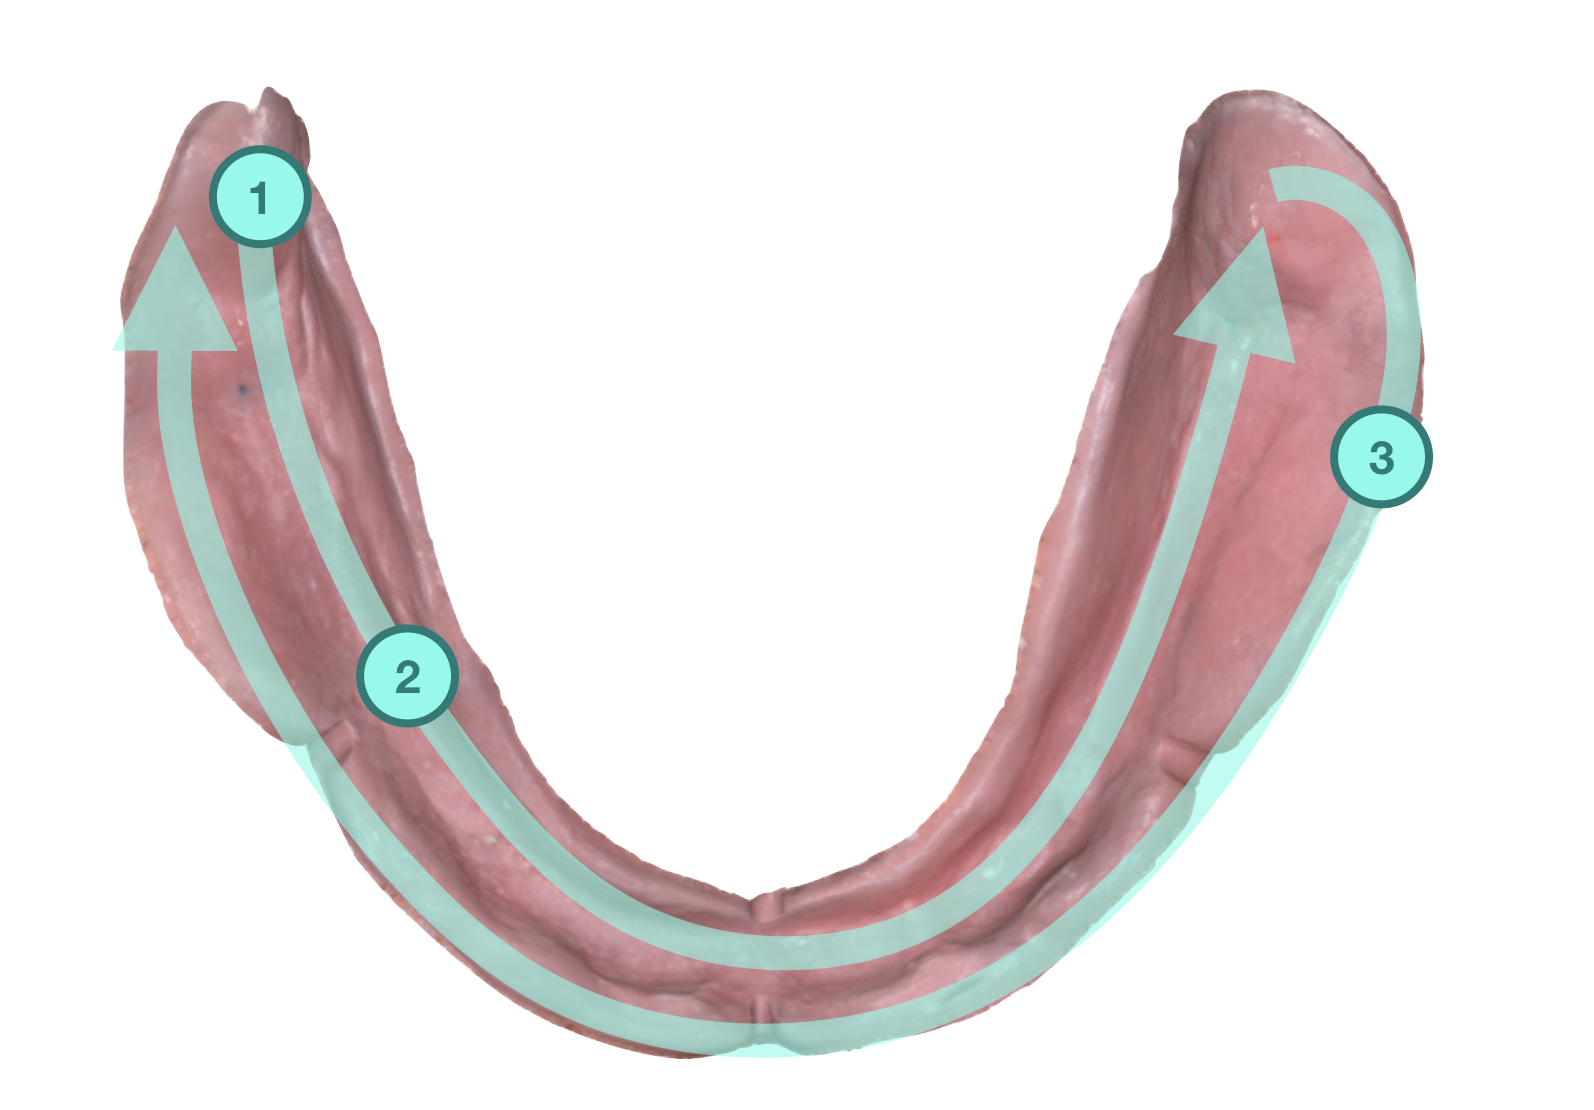 How to scan edentulous cases with the i500